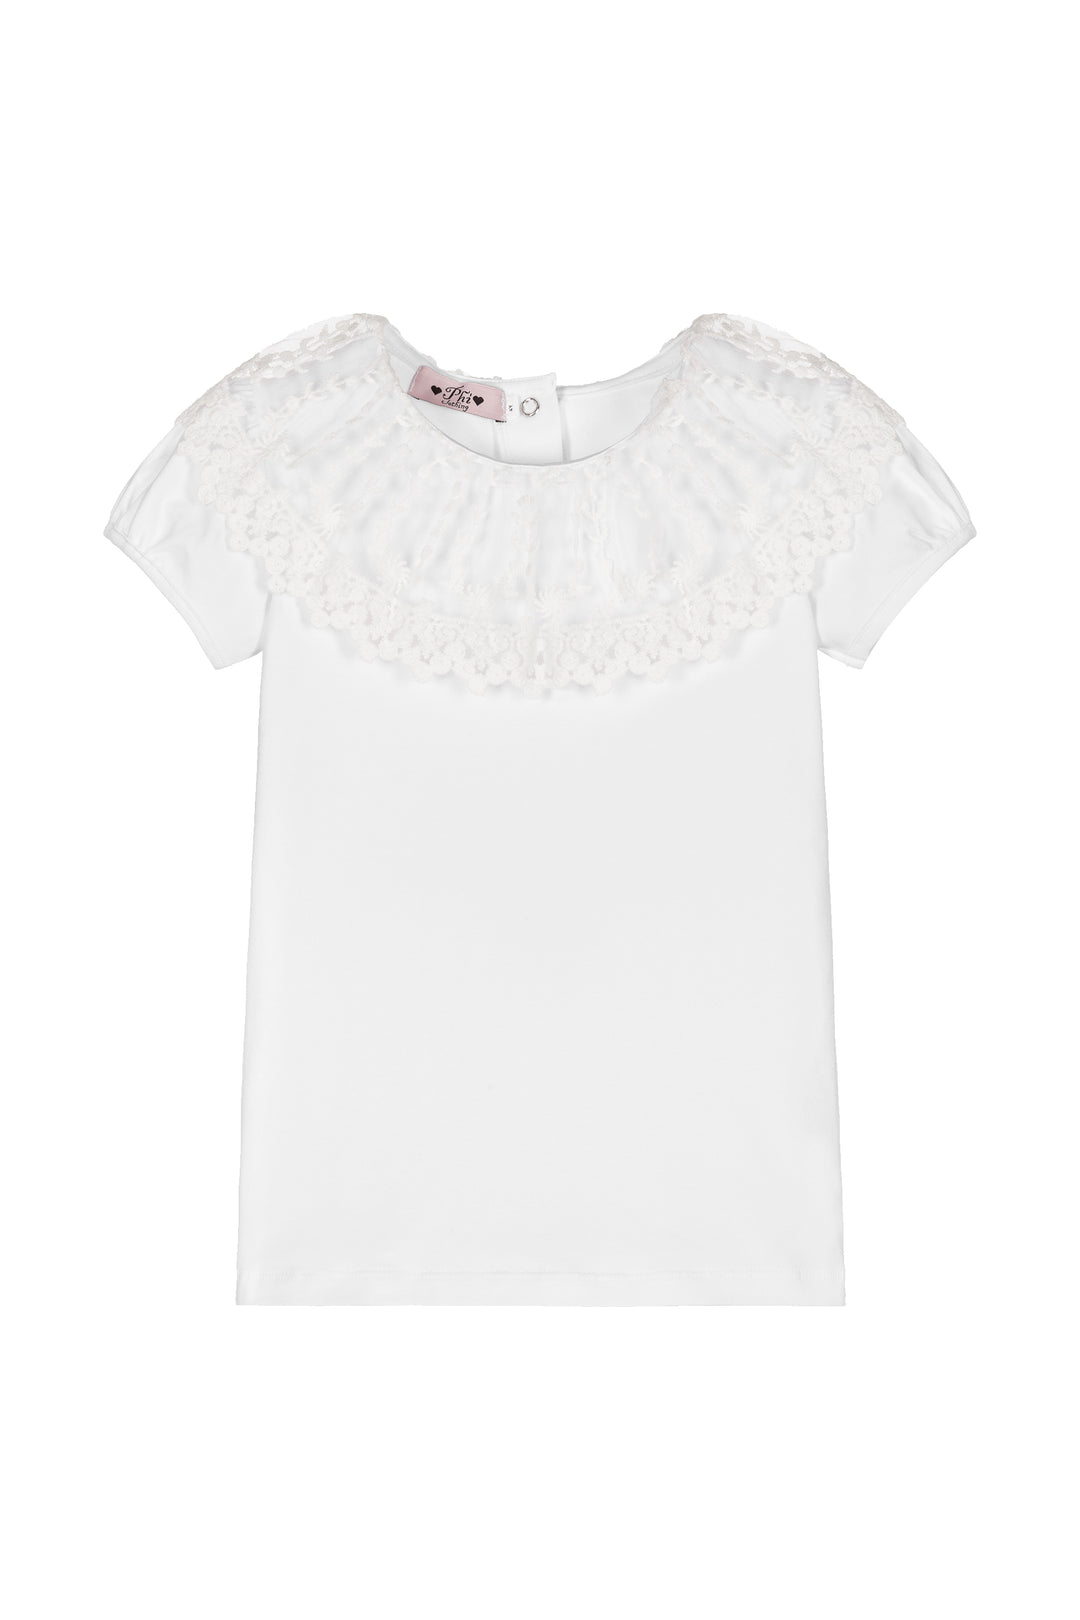 Phi White Vintage Lace Bodysuit/Top | Millie and John